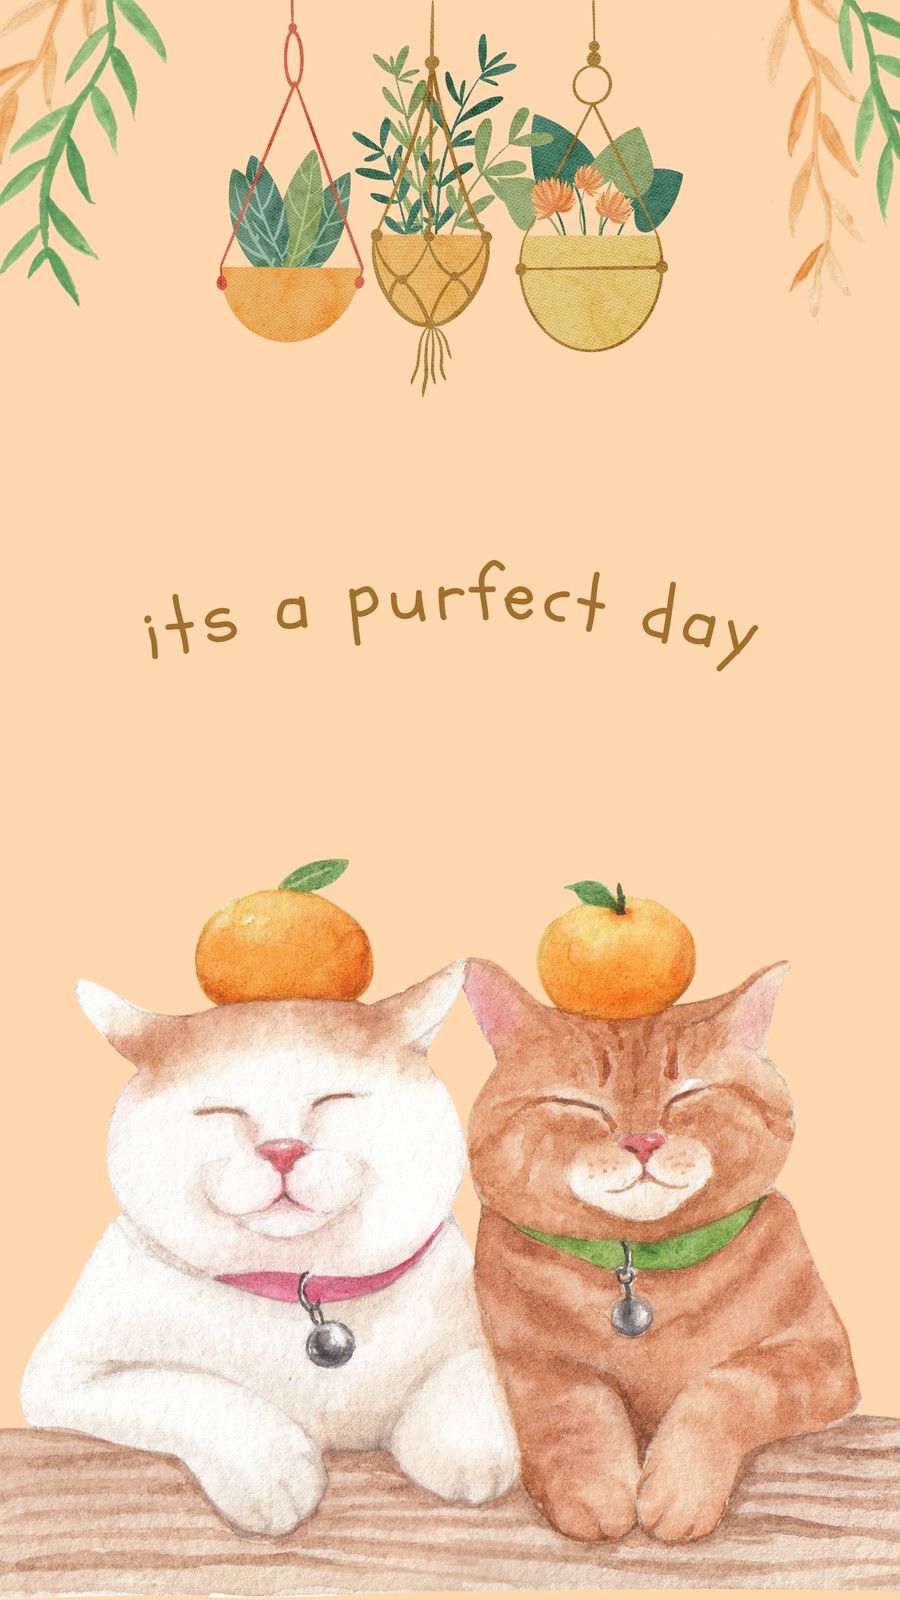 Two cats with oranges on their heads - Cat